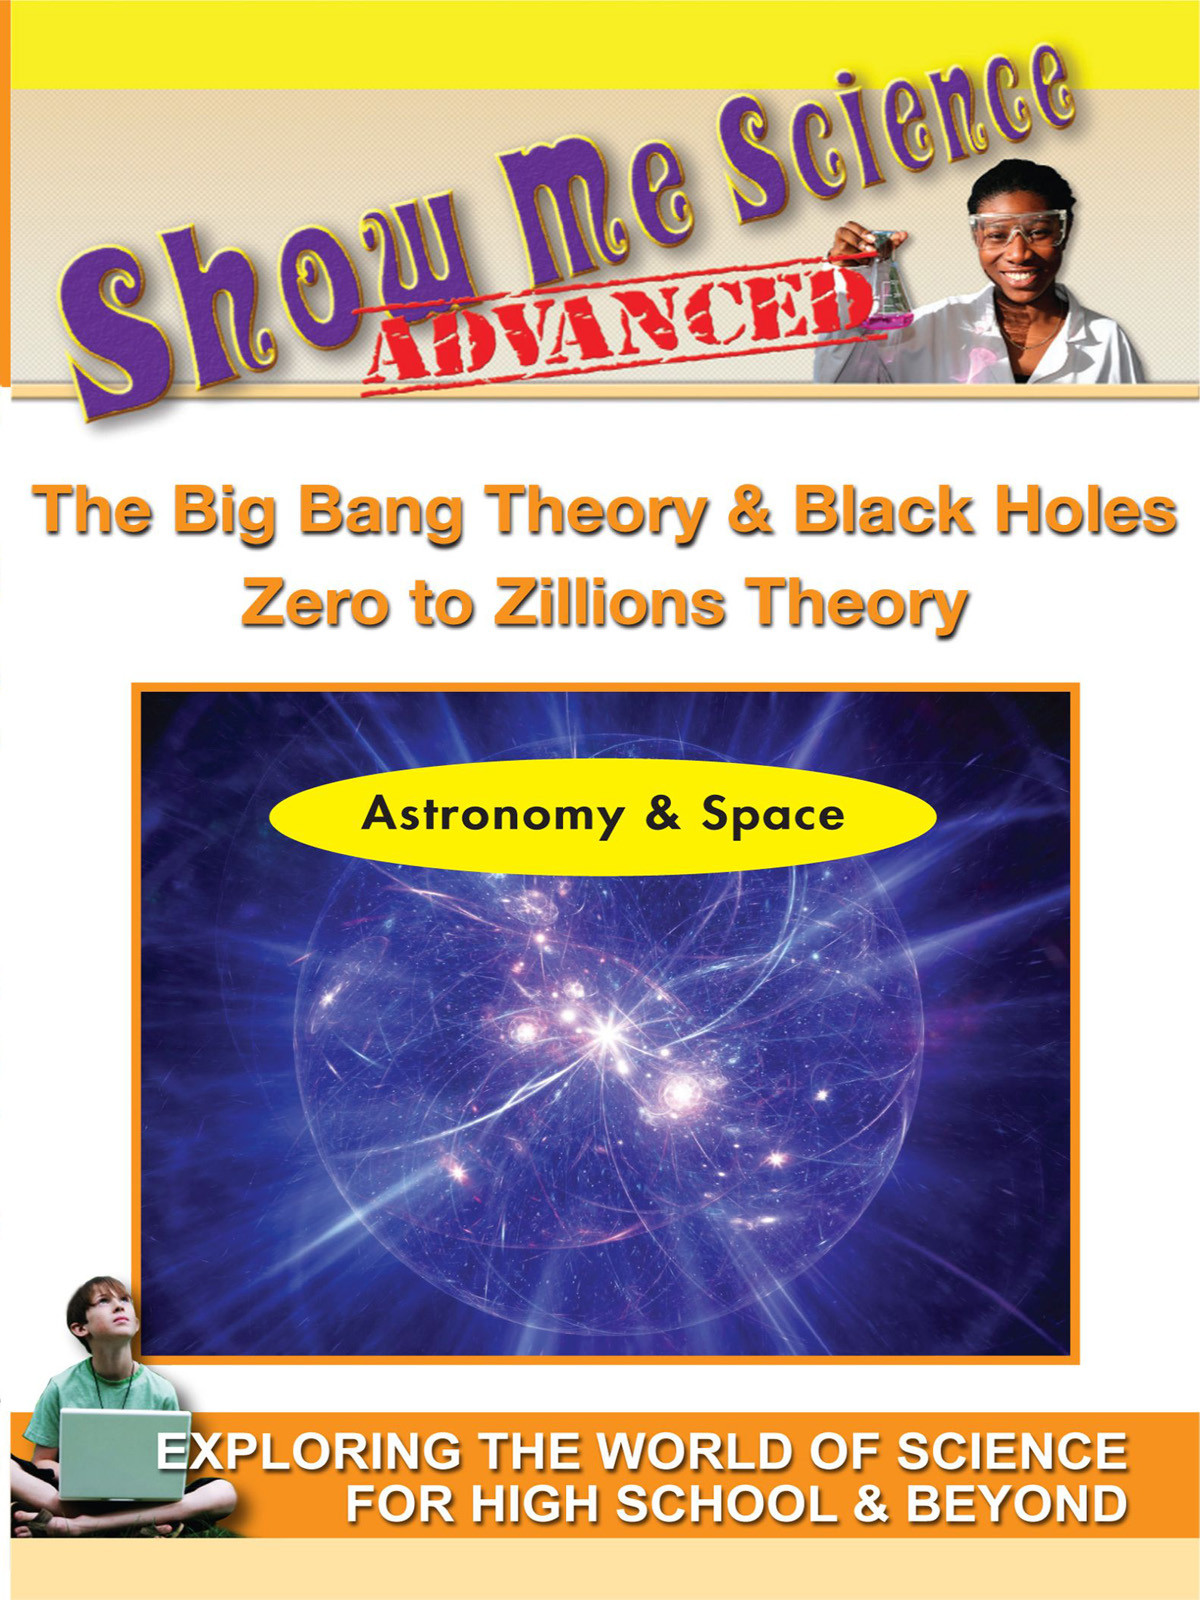 K4620 - Astronomy & Space The Big Bang & Black Holes  Zero to Zillions Theory